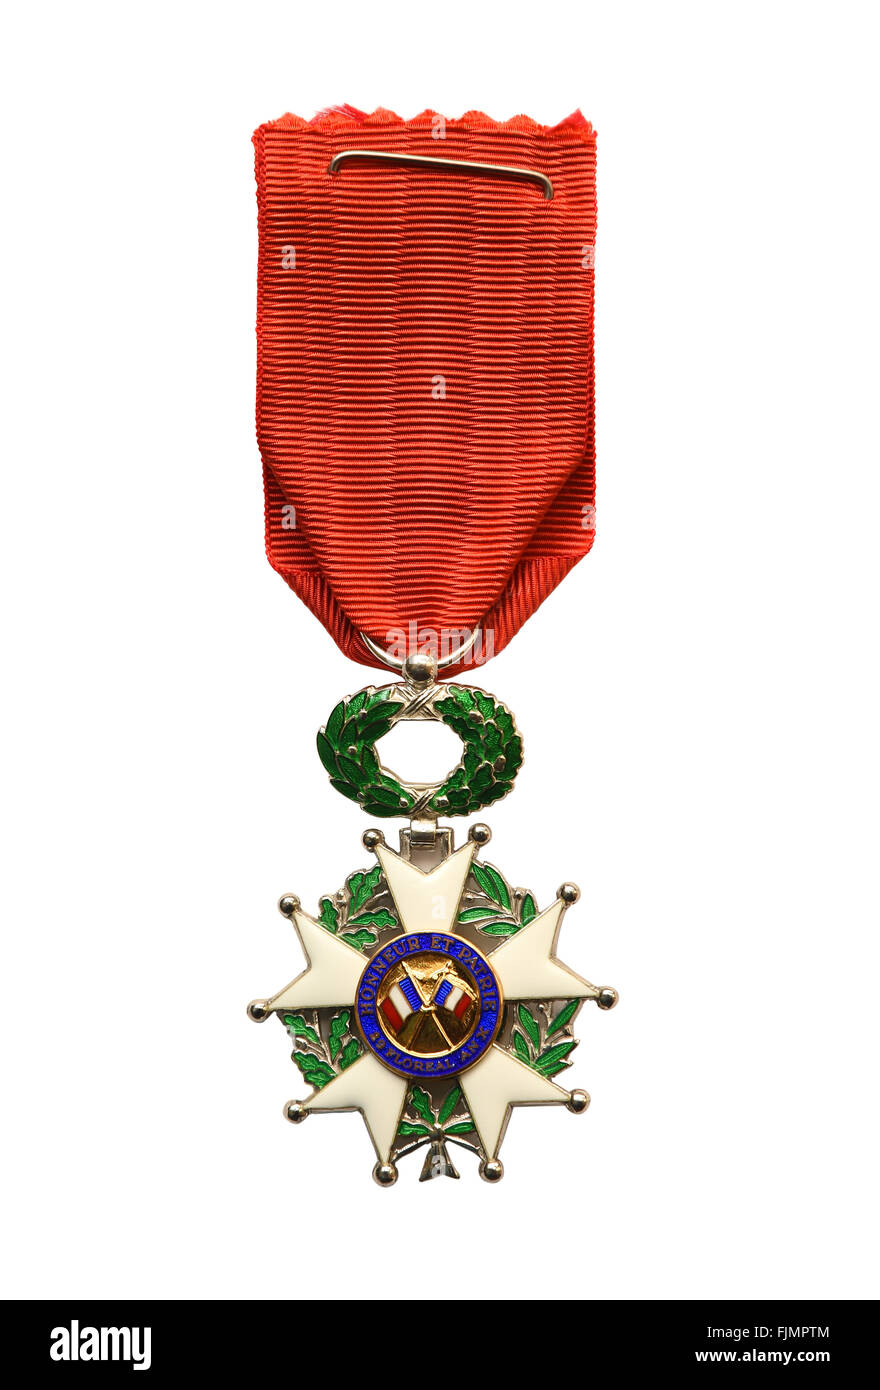 national honours and awards ceremony clipart